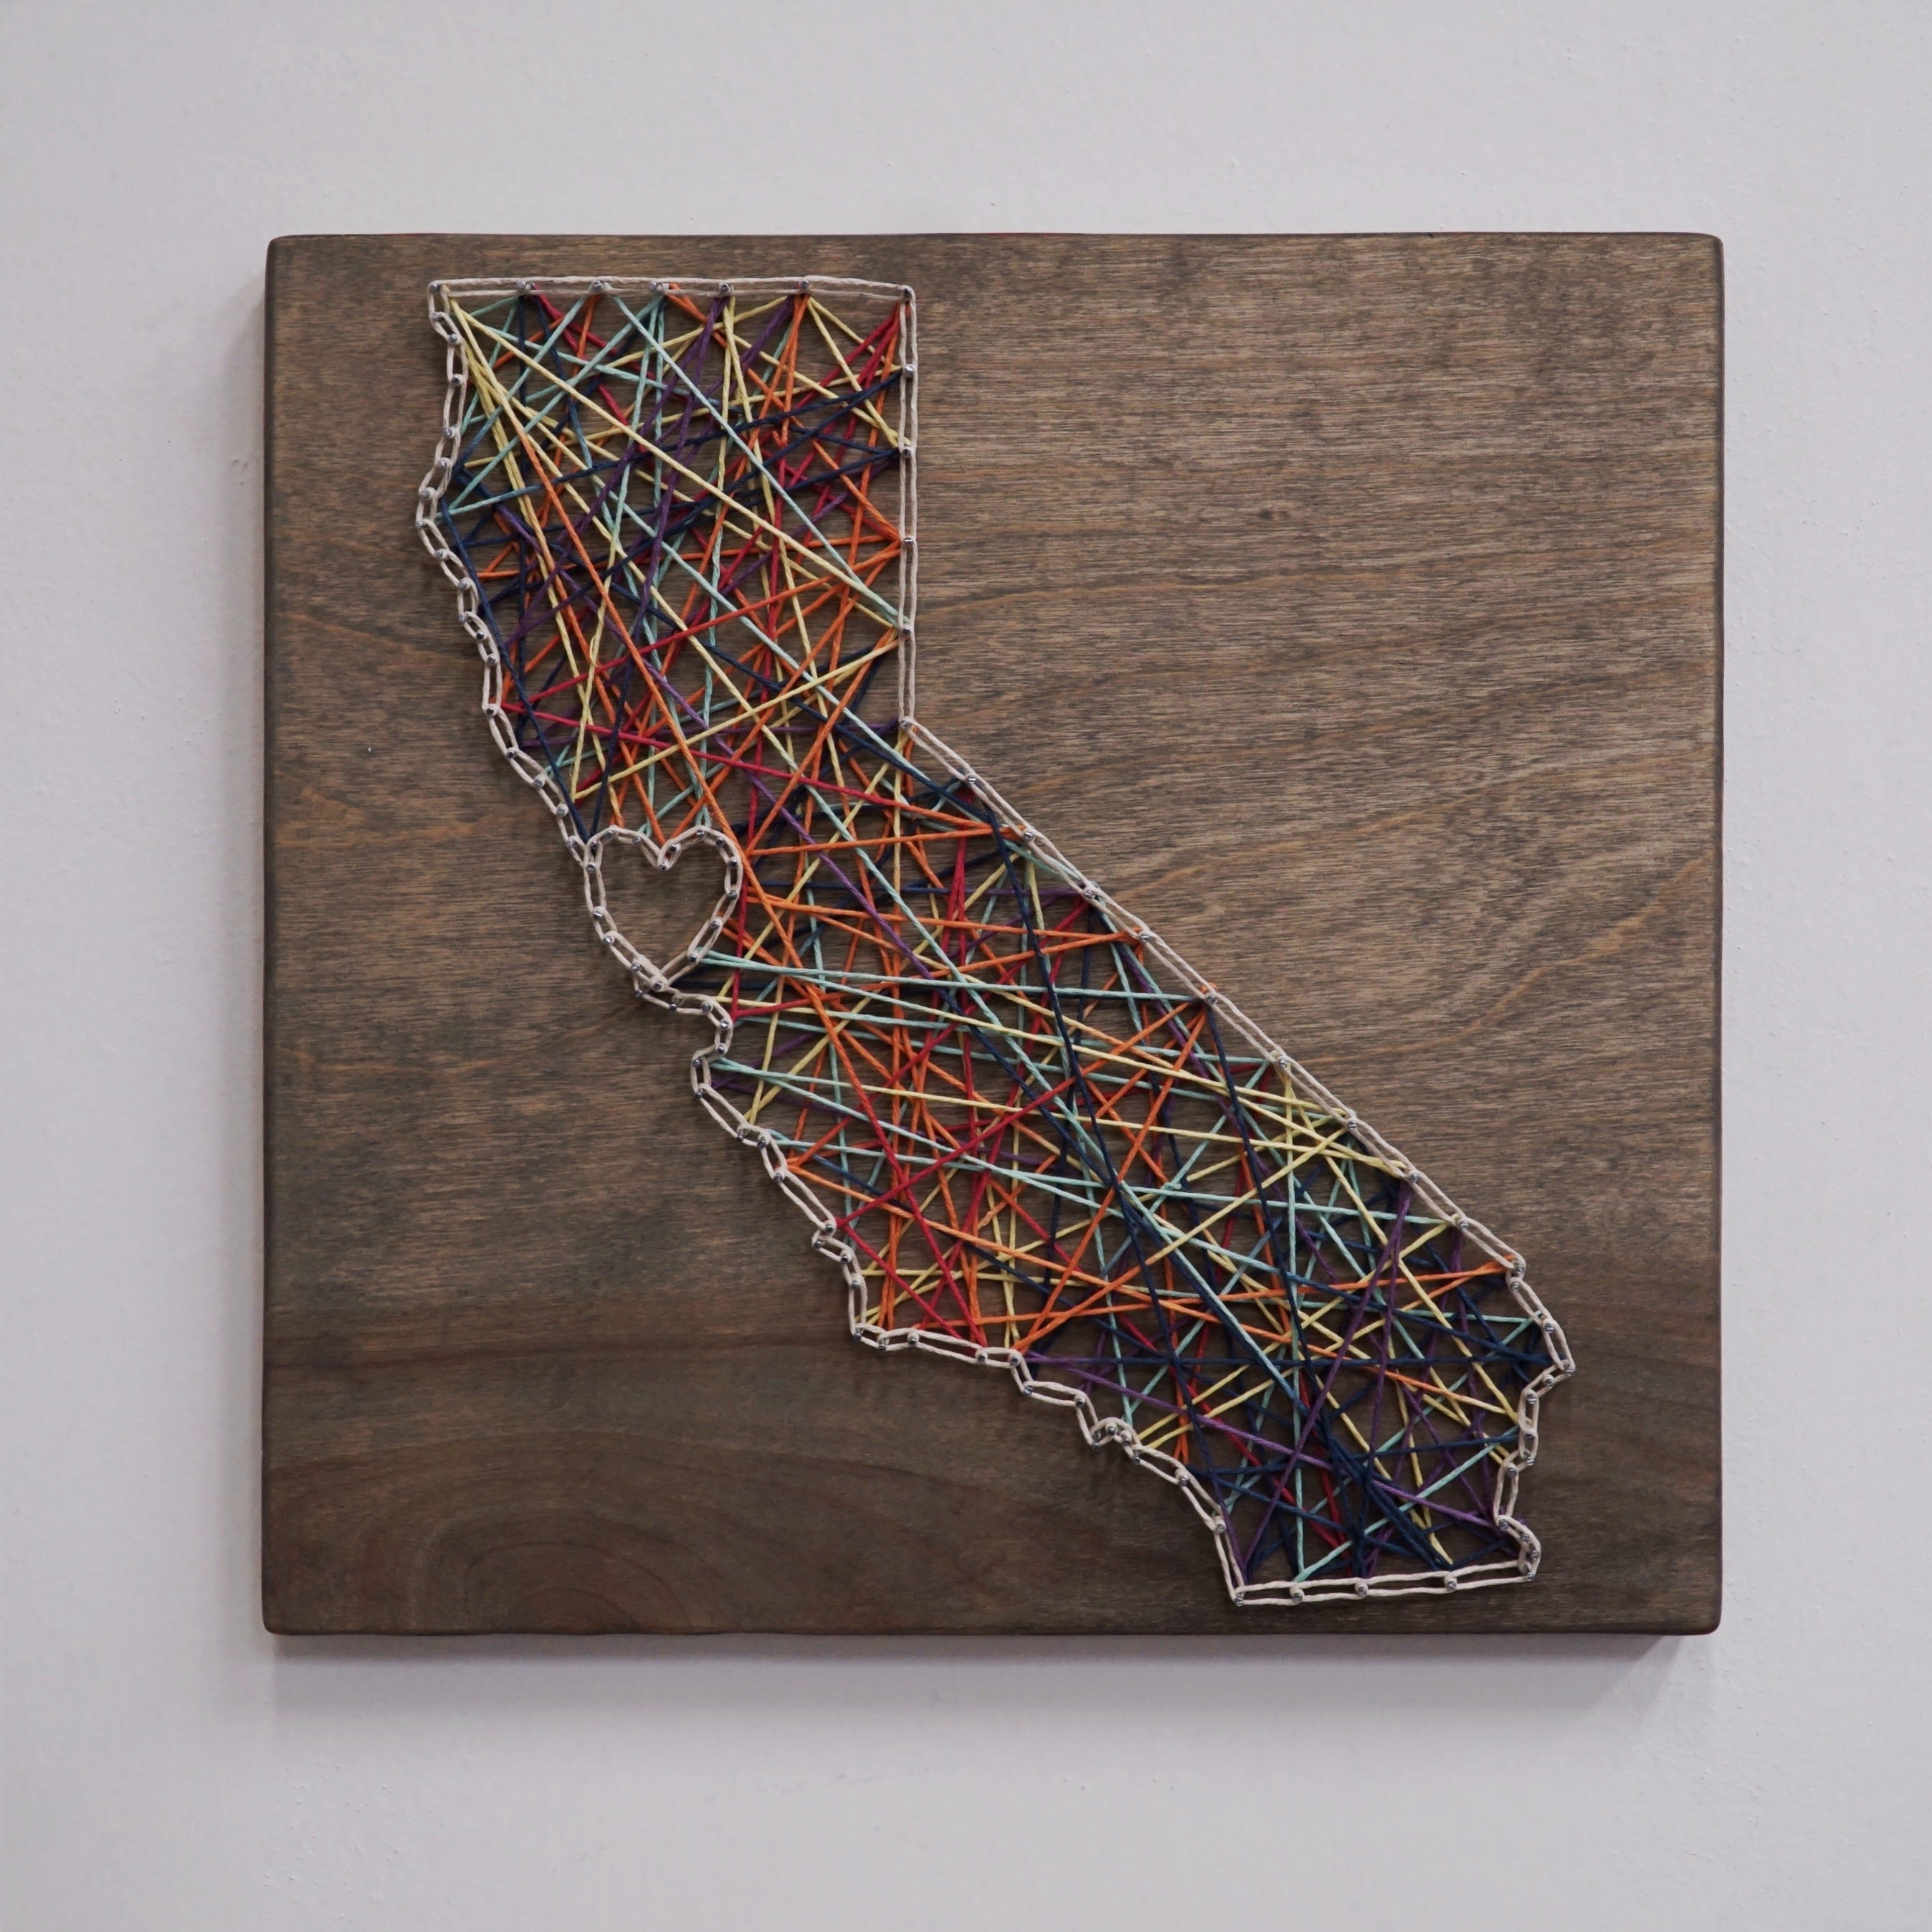 California Art with Heart 6x6 in